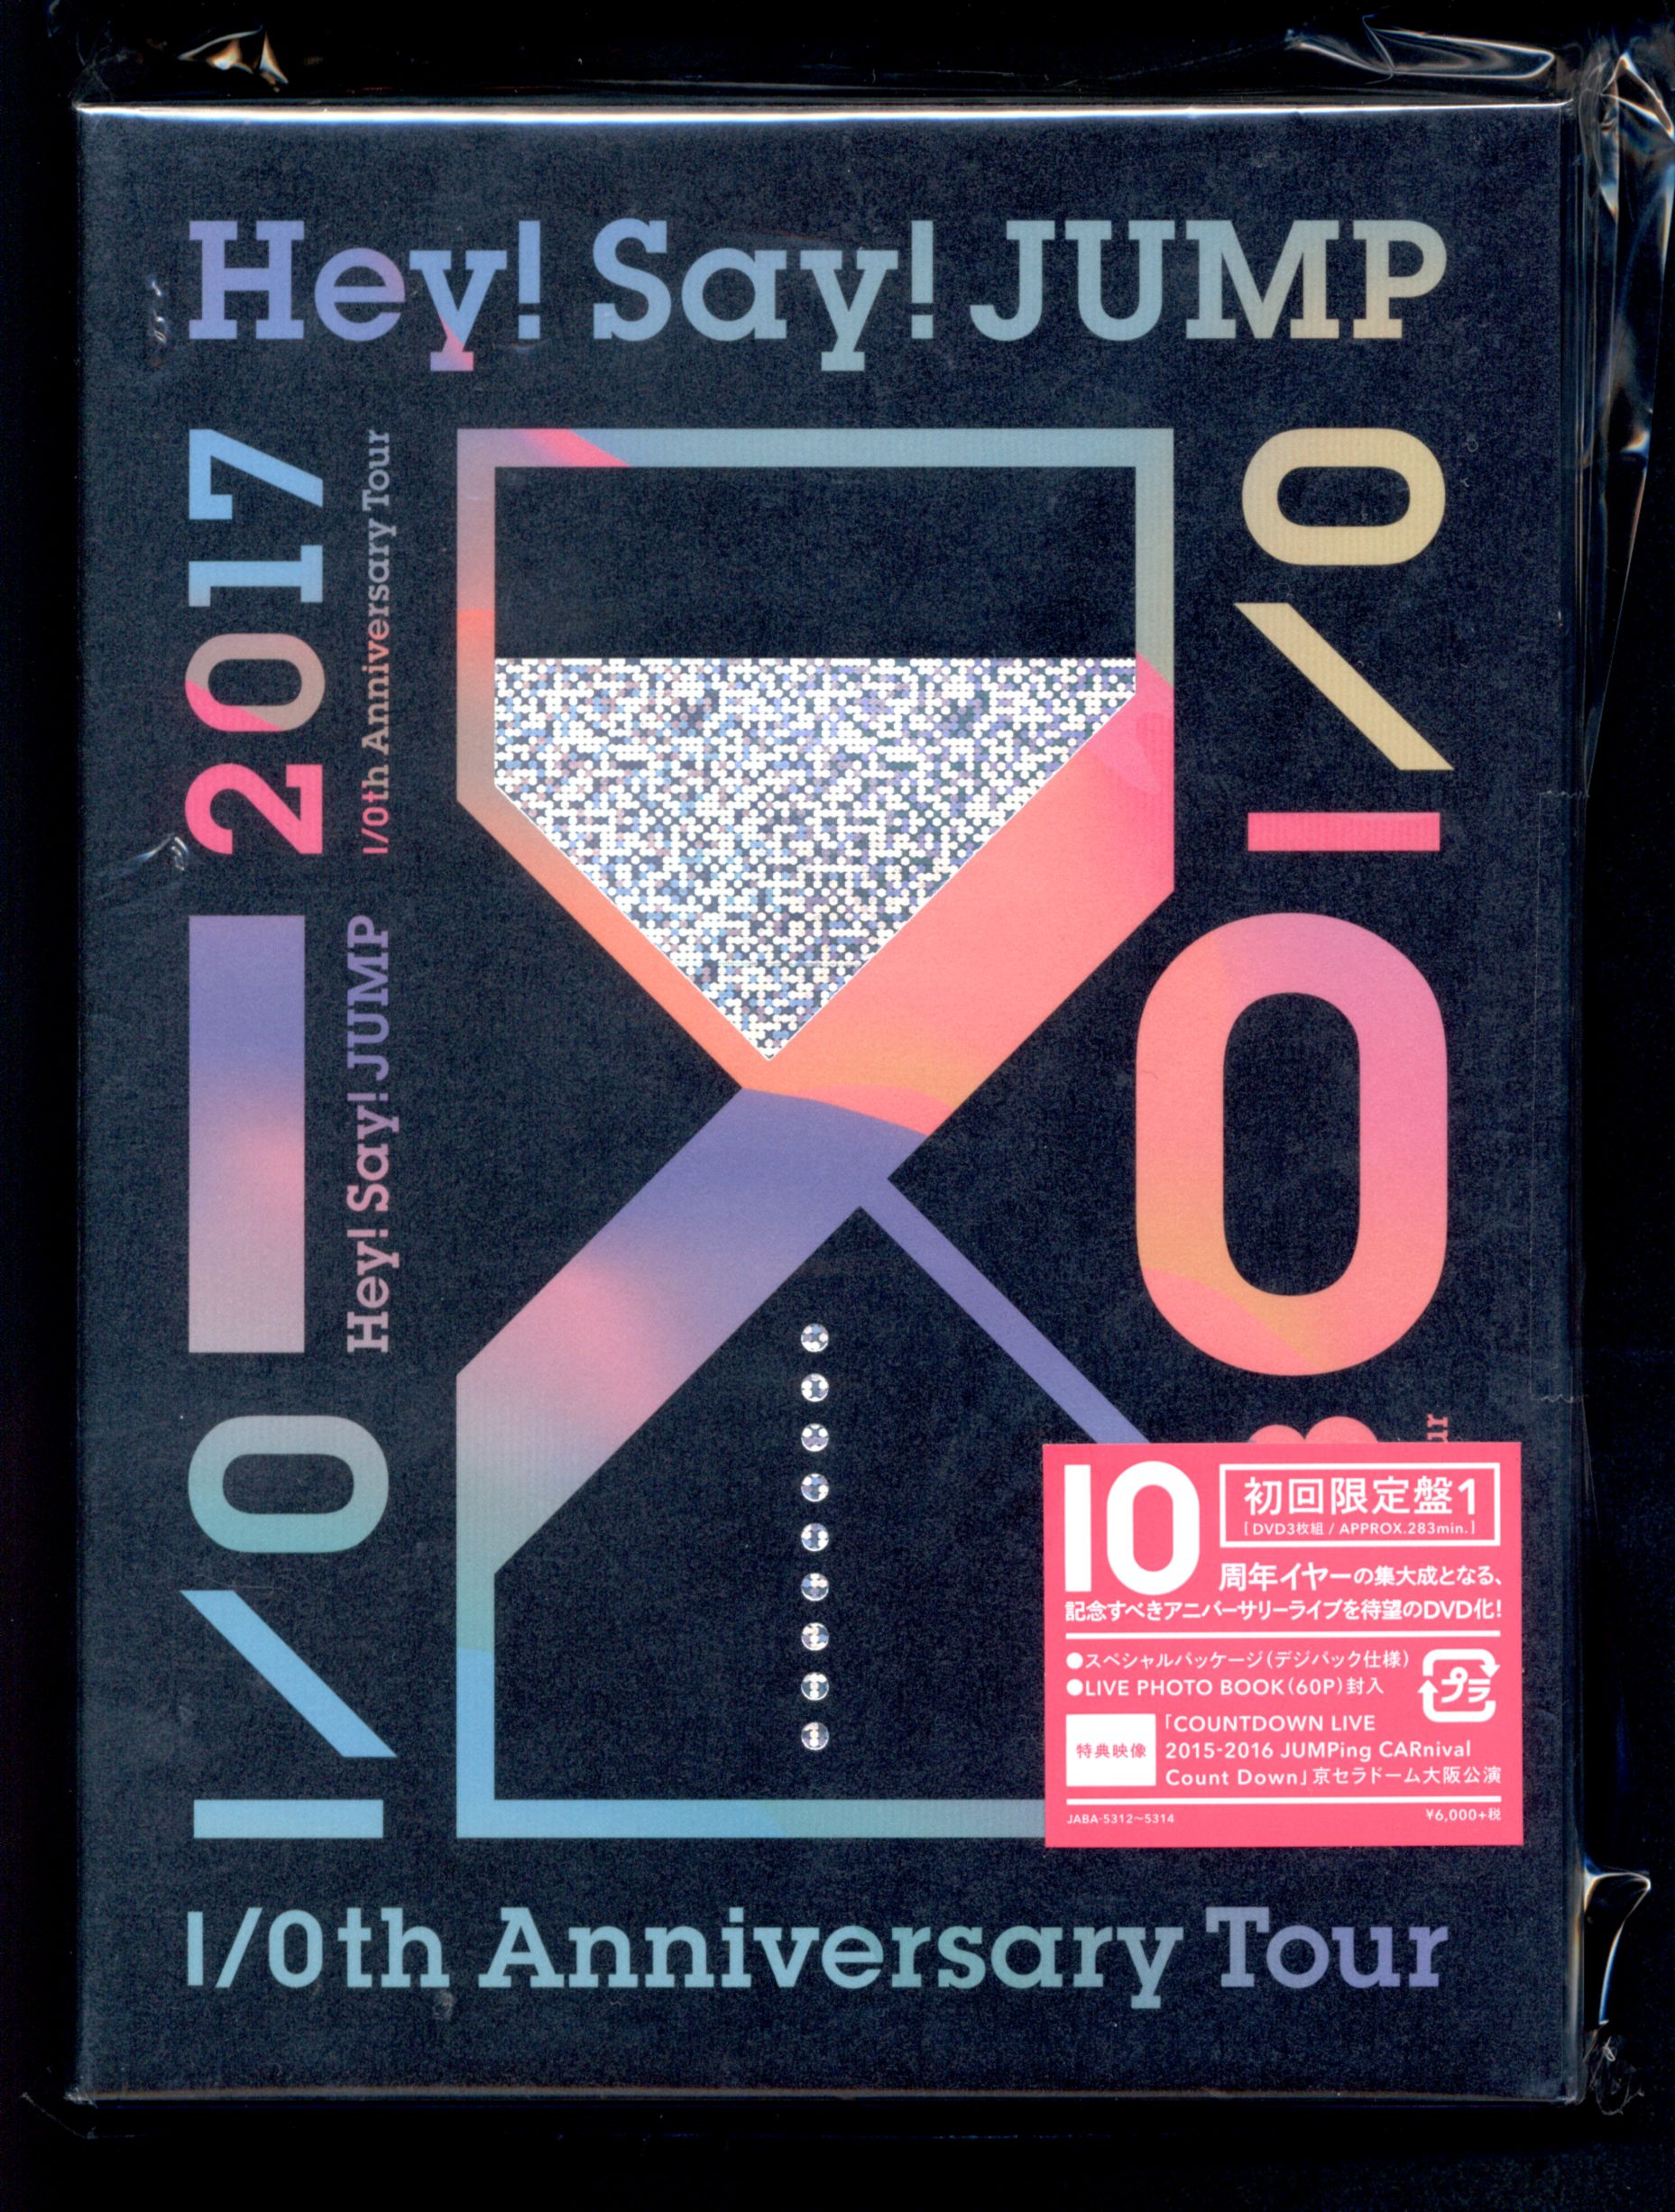 Hey Say Jump I Oth Anniversry Tour 17 18 初回限定盤1 3dvd Live Photo Book封入 Countdown Live 15 16 Jumping Carnival Count Down 京セラドーム大阪公演収録 まんだらけ Mandarake